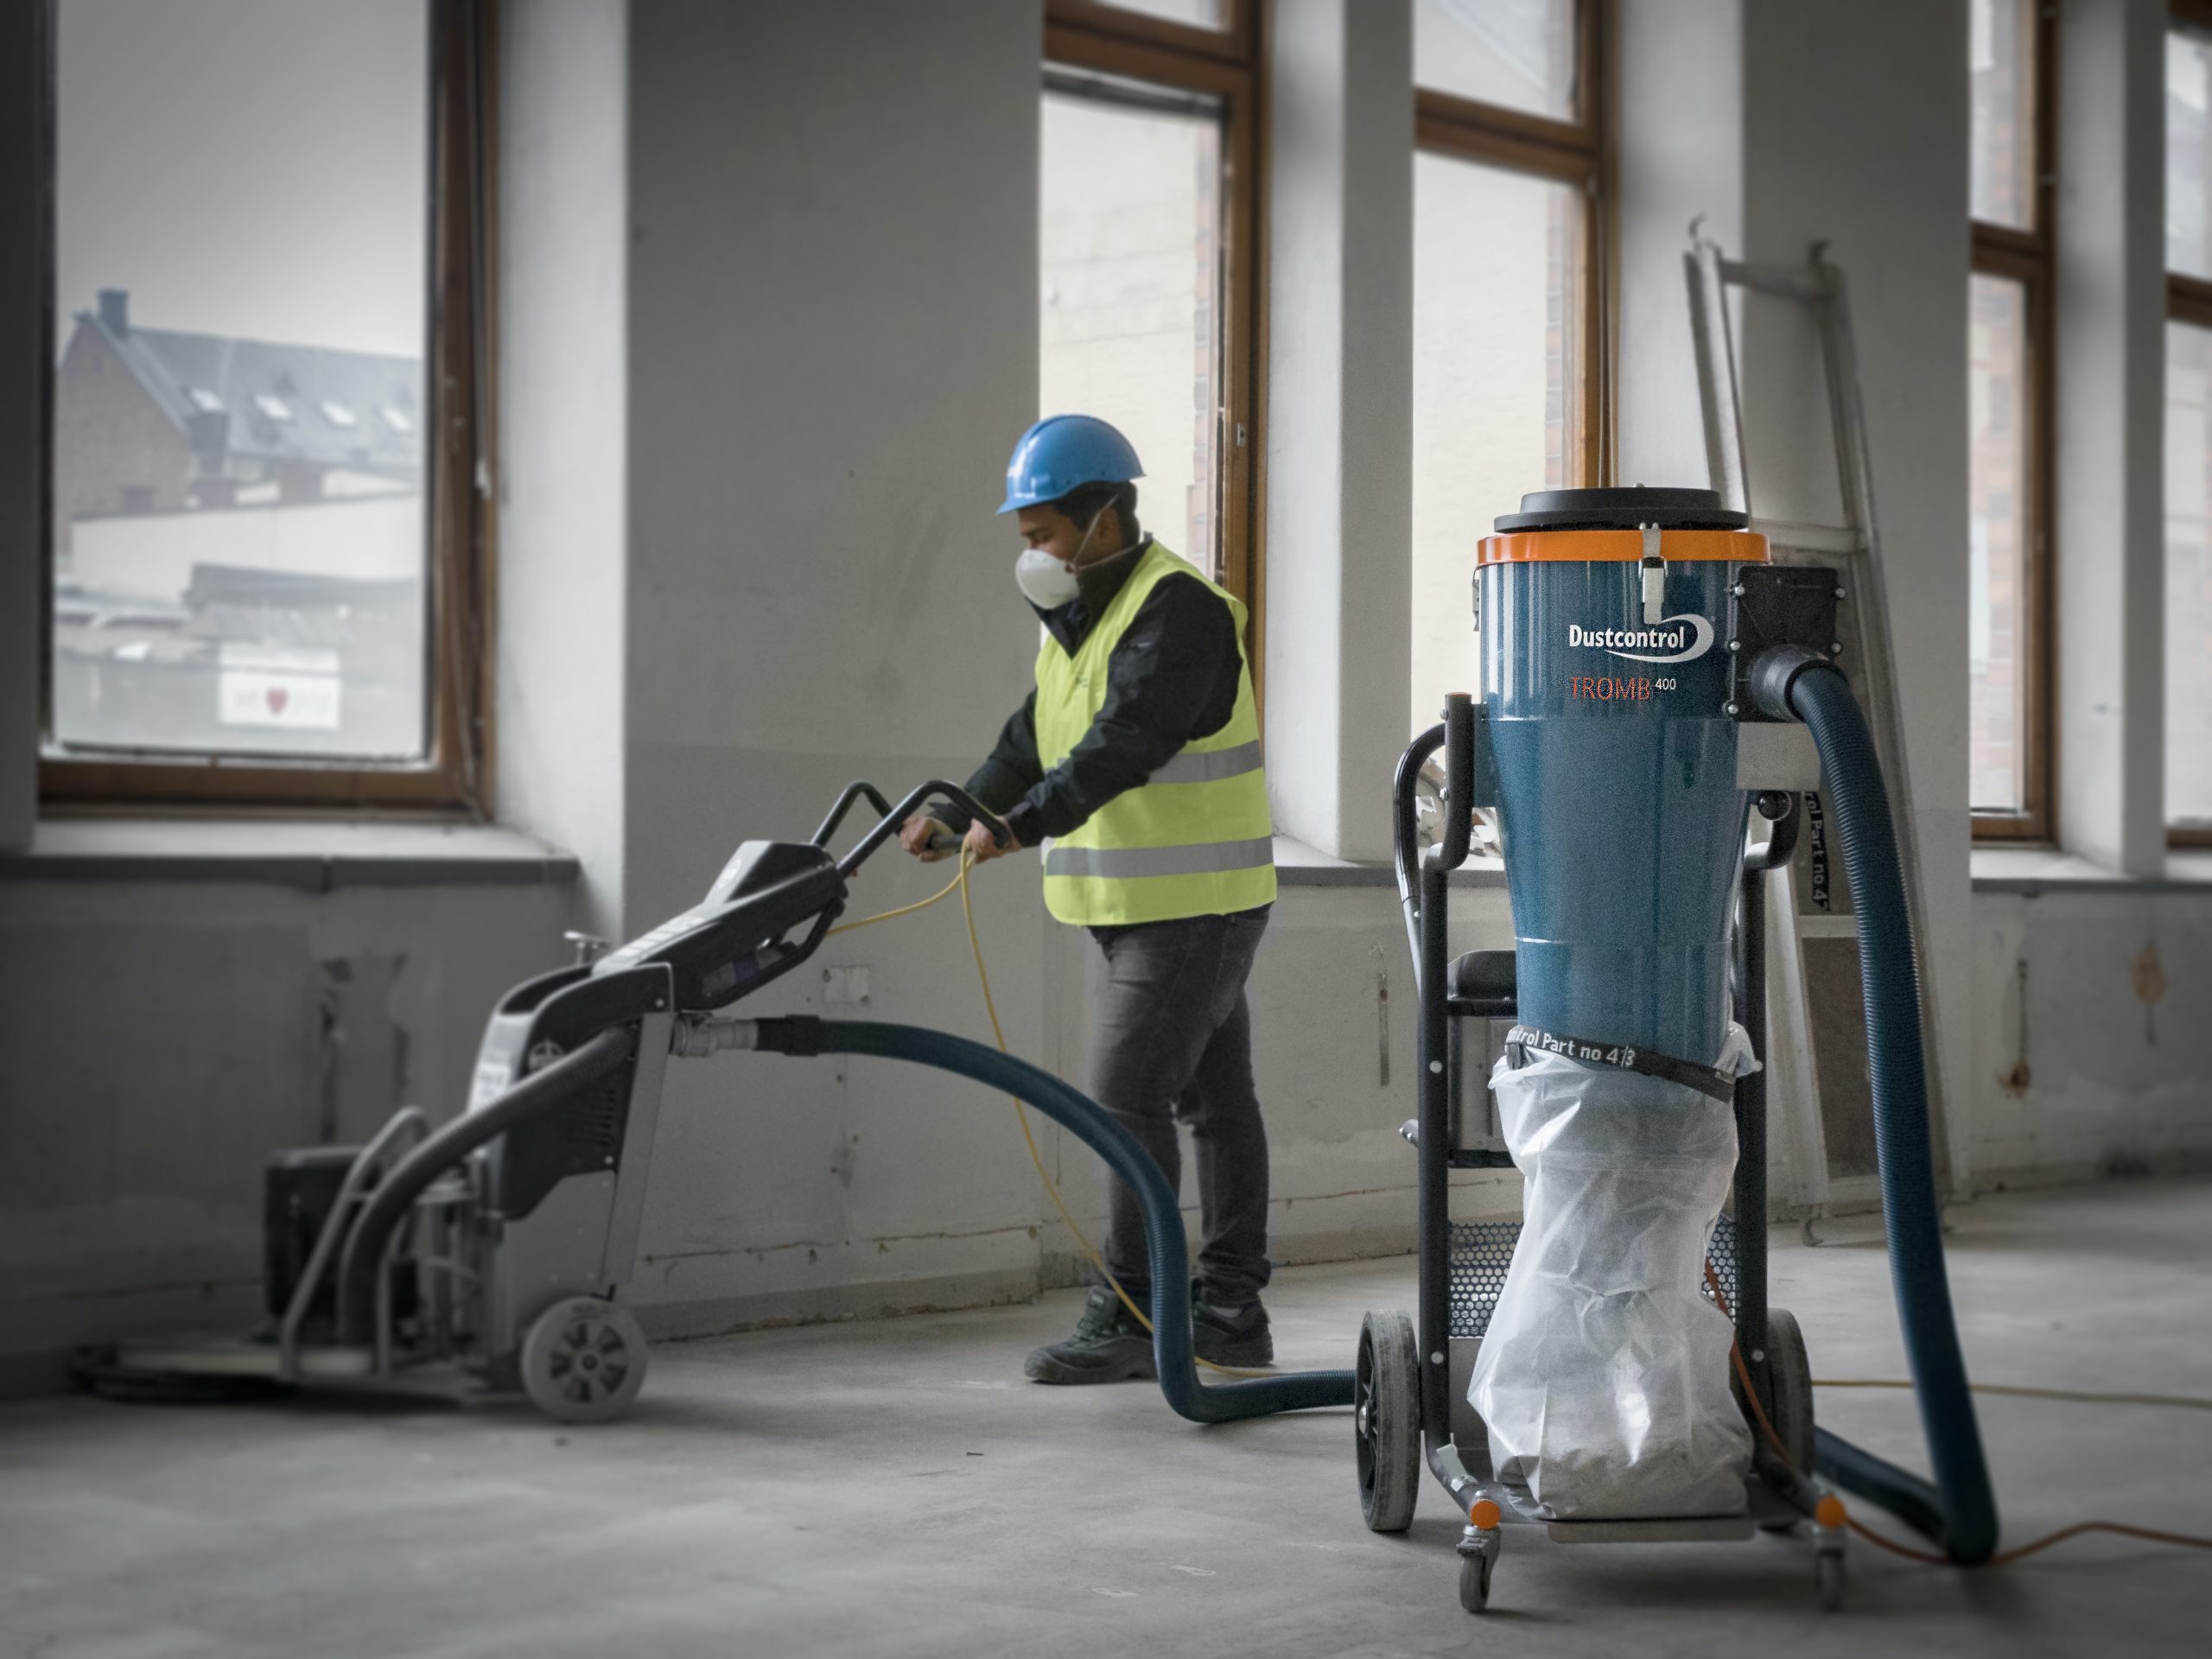 Dust extraction specialist to demonstrate problem-solving capabilities at eagerly anticipated SHE Show South 2021 @DustcontrolUK